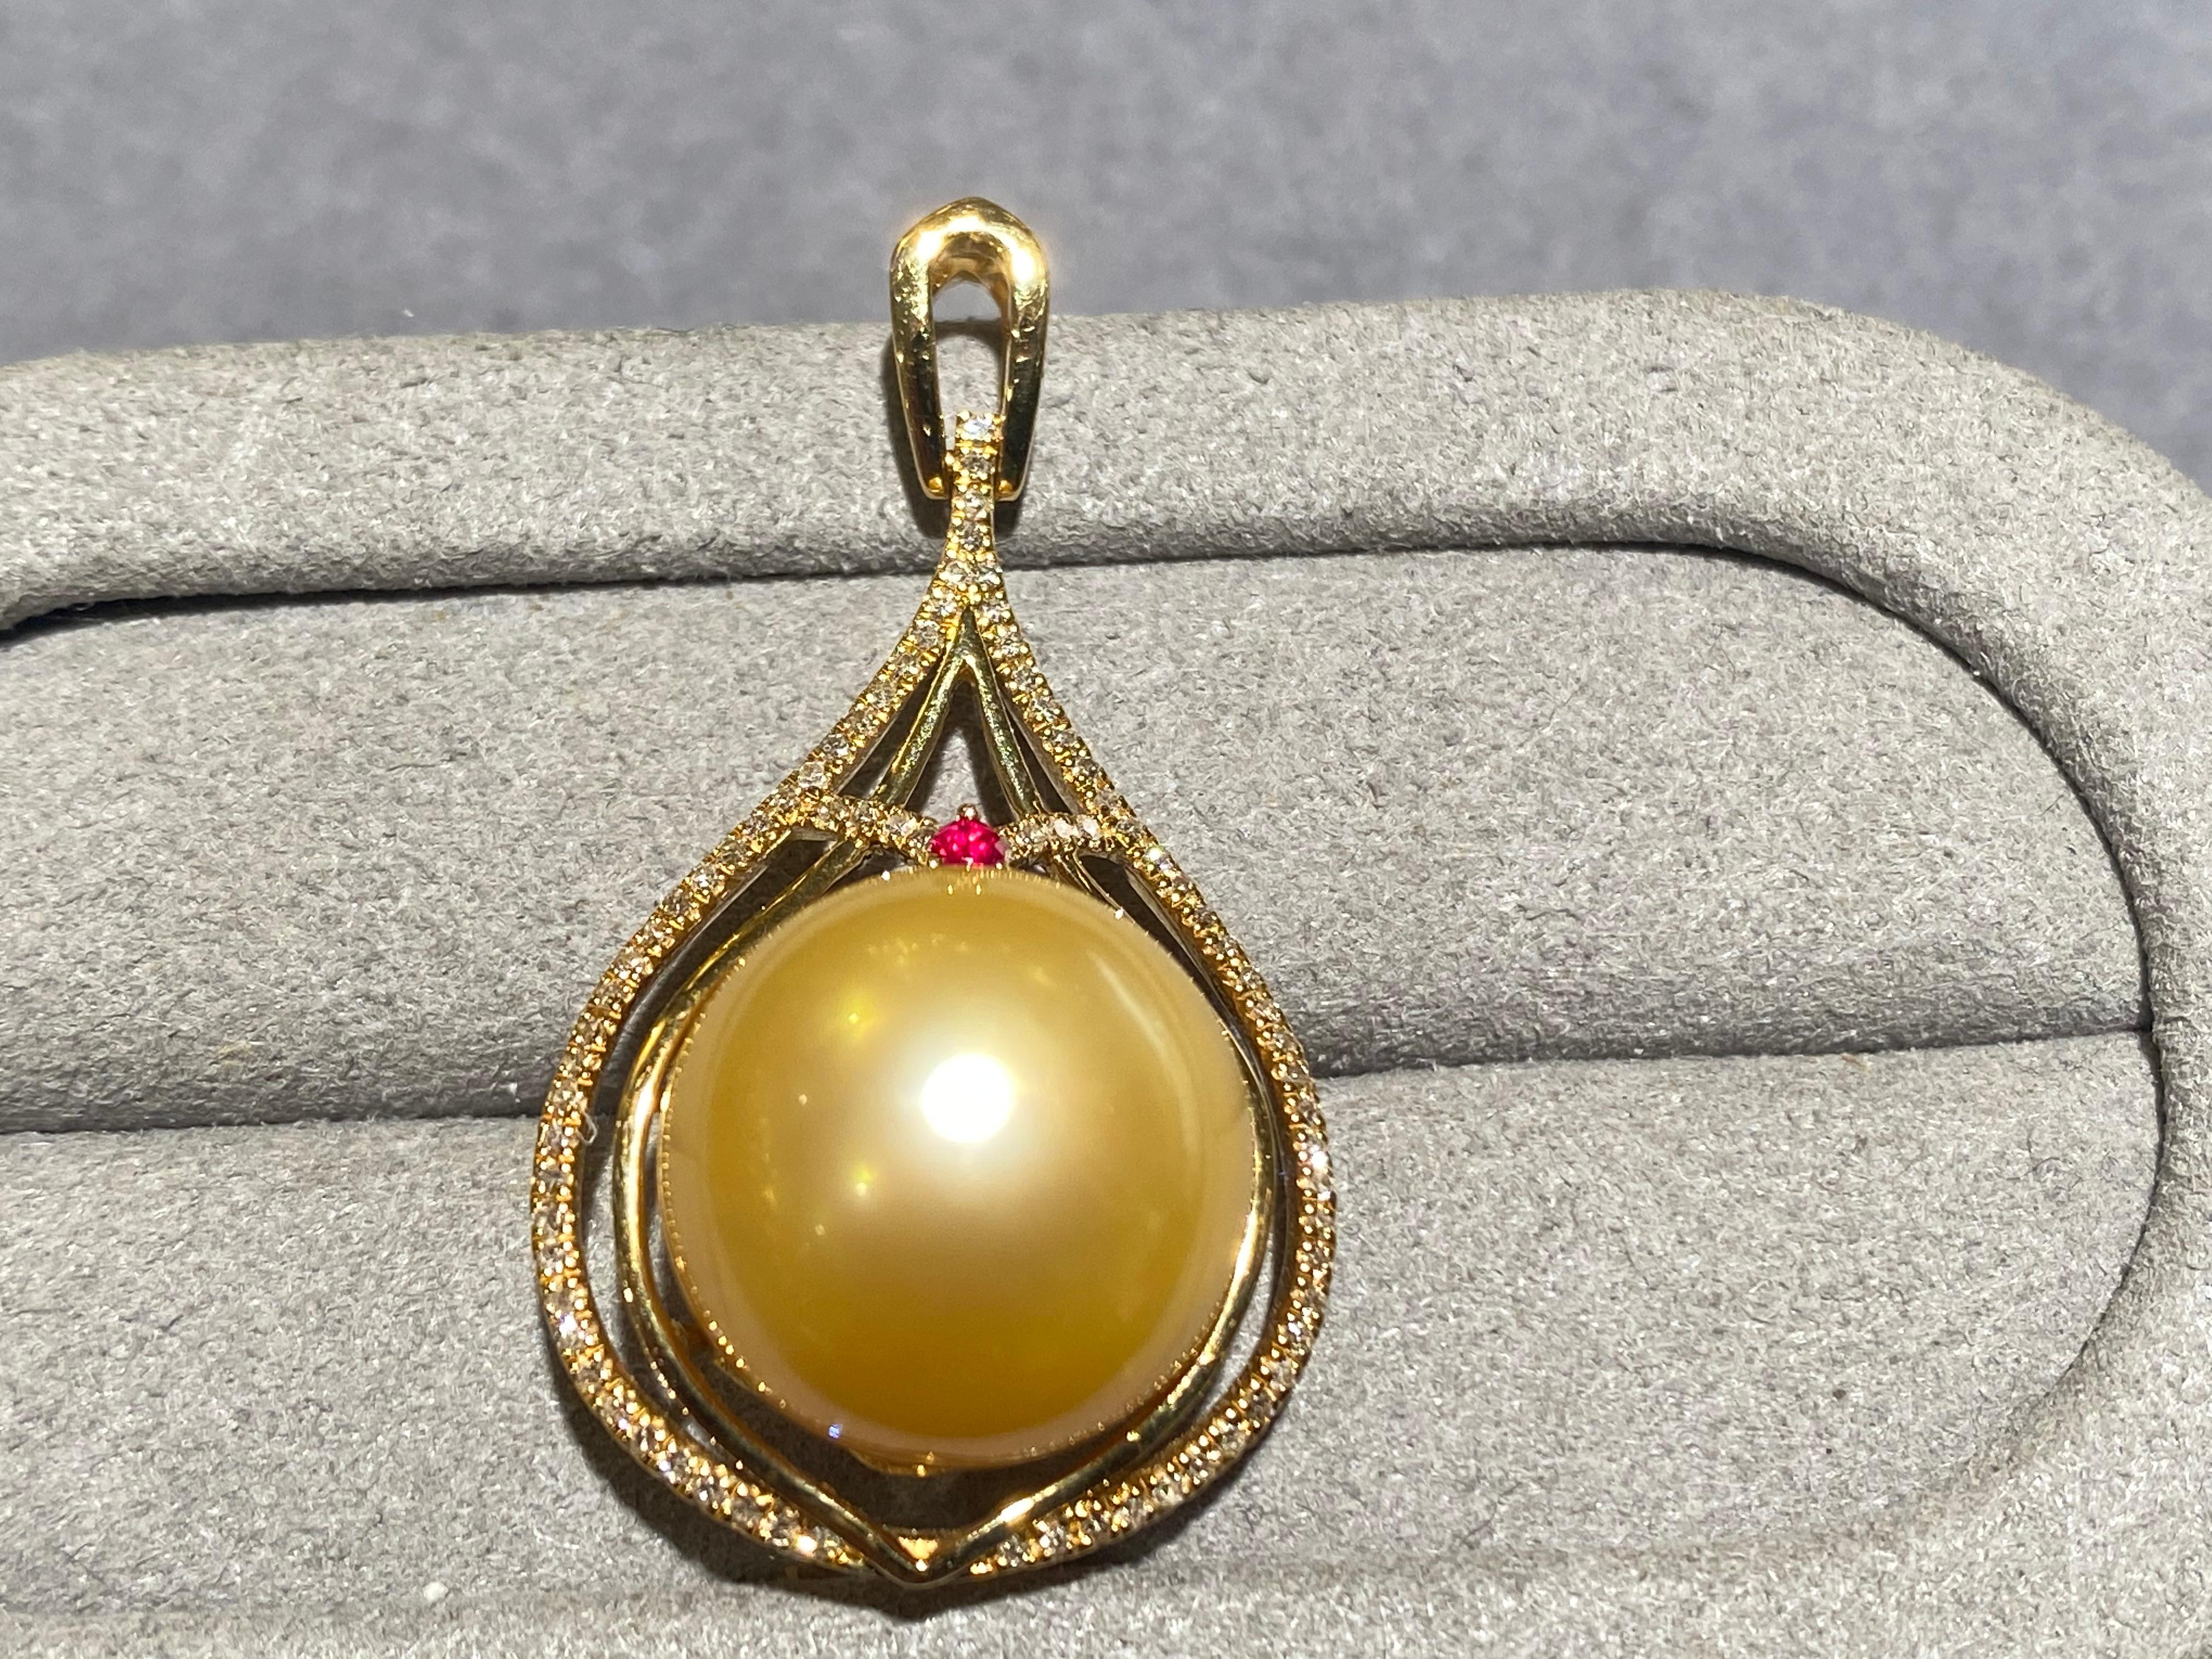 A 14.1 mm rich golden colour south sea pearl and diamond in 18k yellow gold. The pendant design resemble a rain drop with a bale on top. The south sea pearl is set at the bottom of the pendant and the peripheral of the pendant is surrounded by